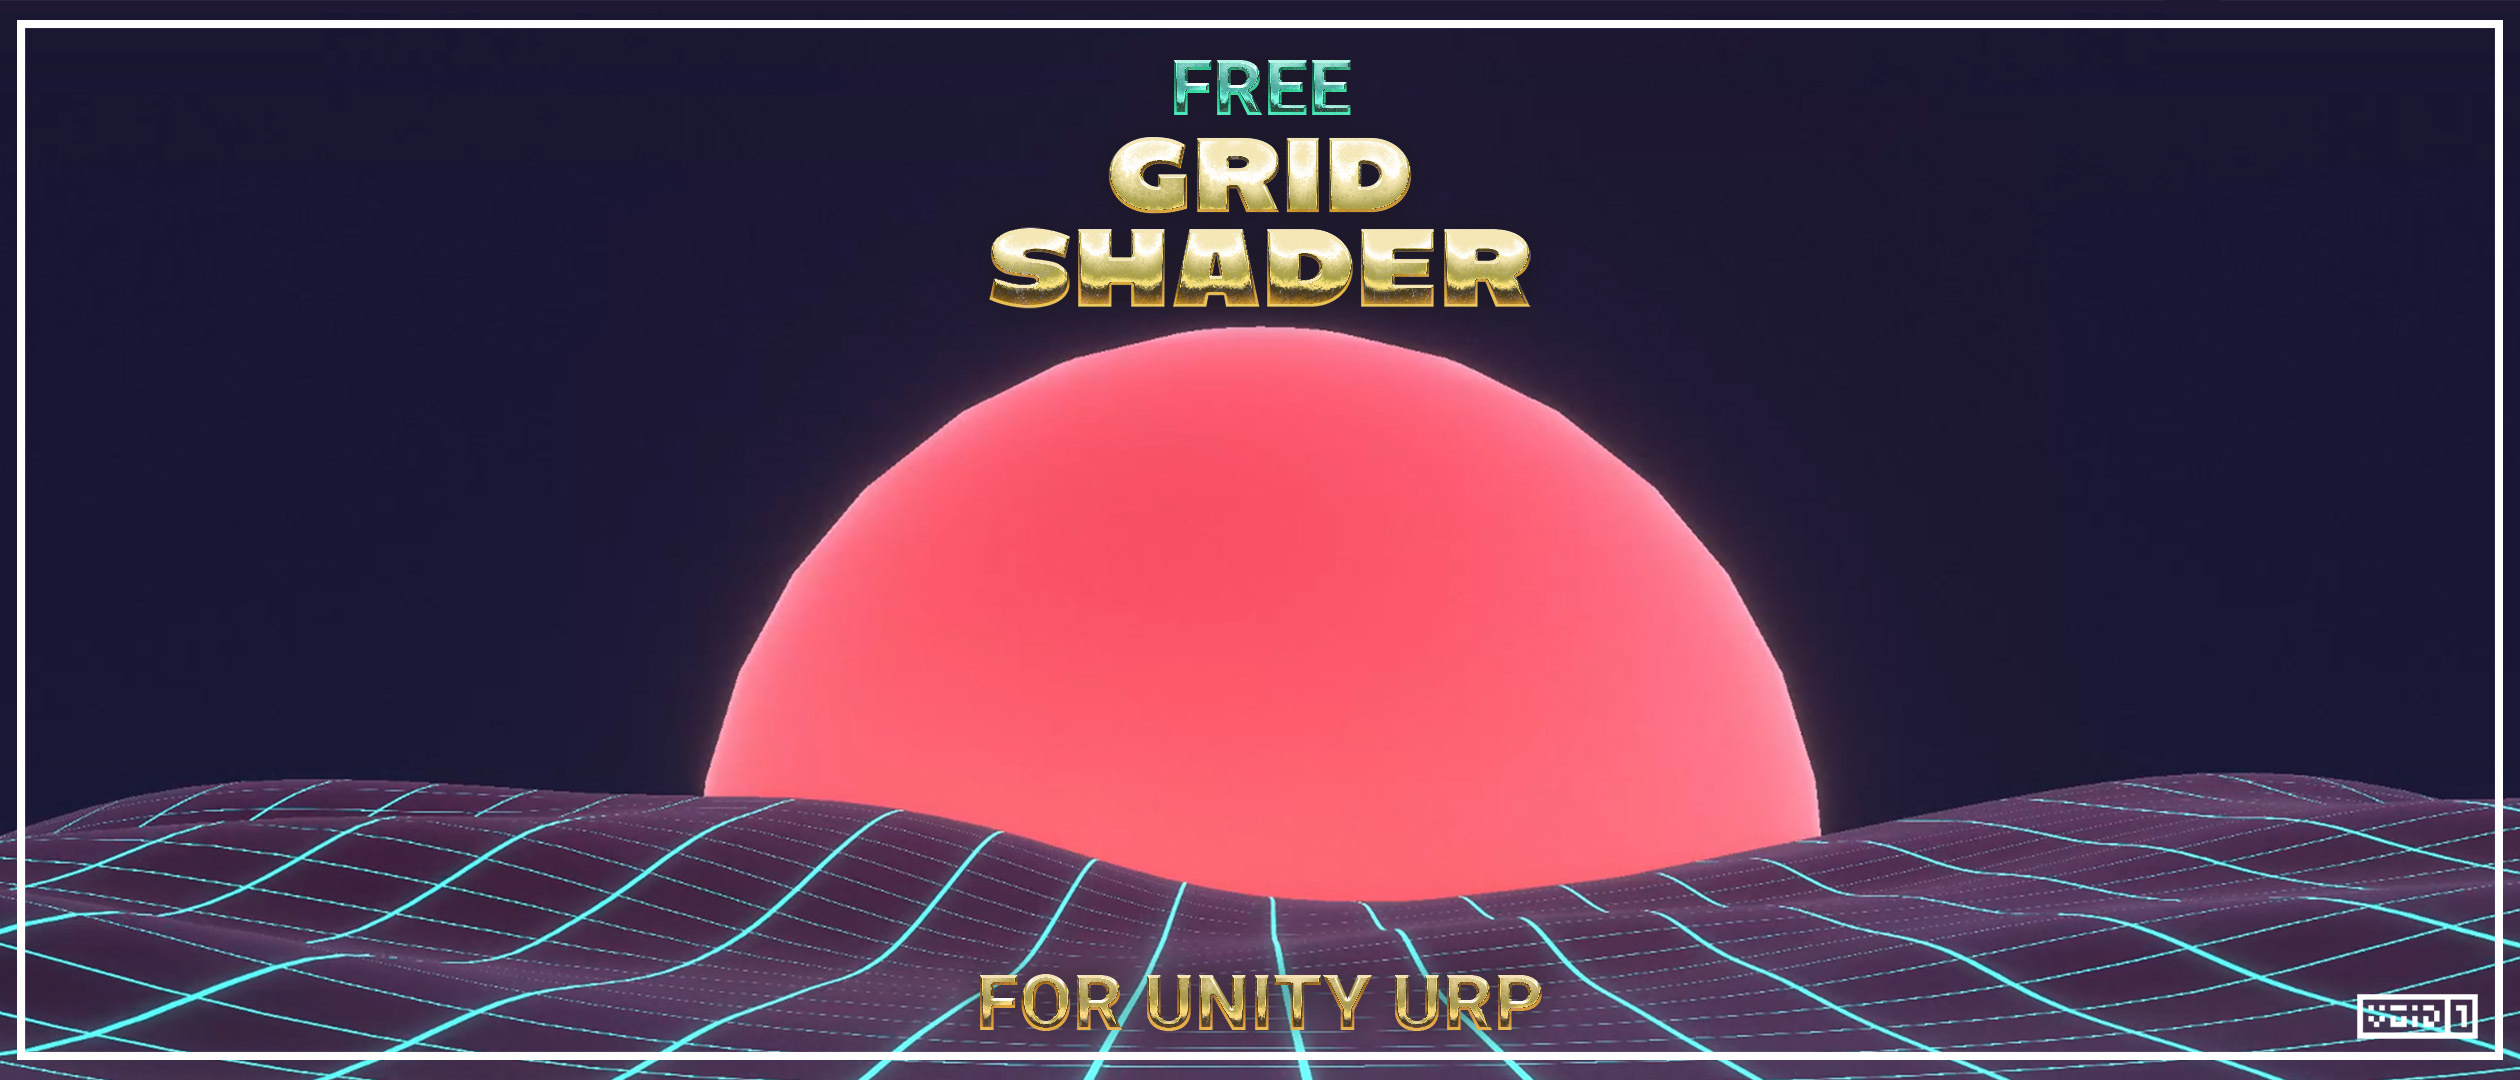 Free Grid Shader for Unity URP